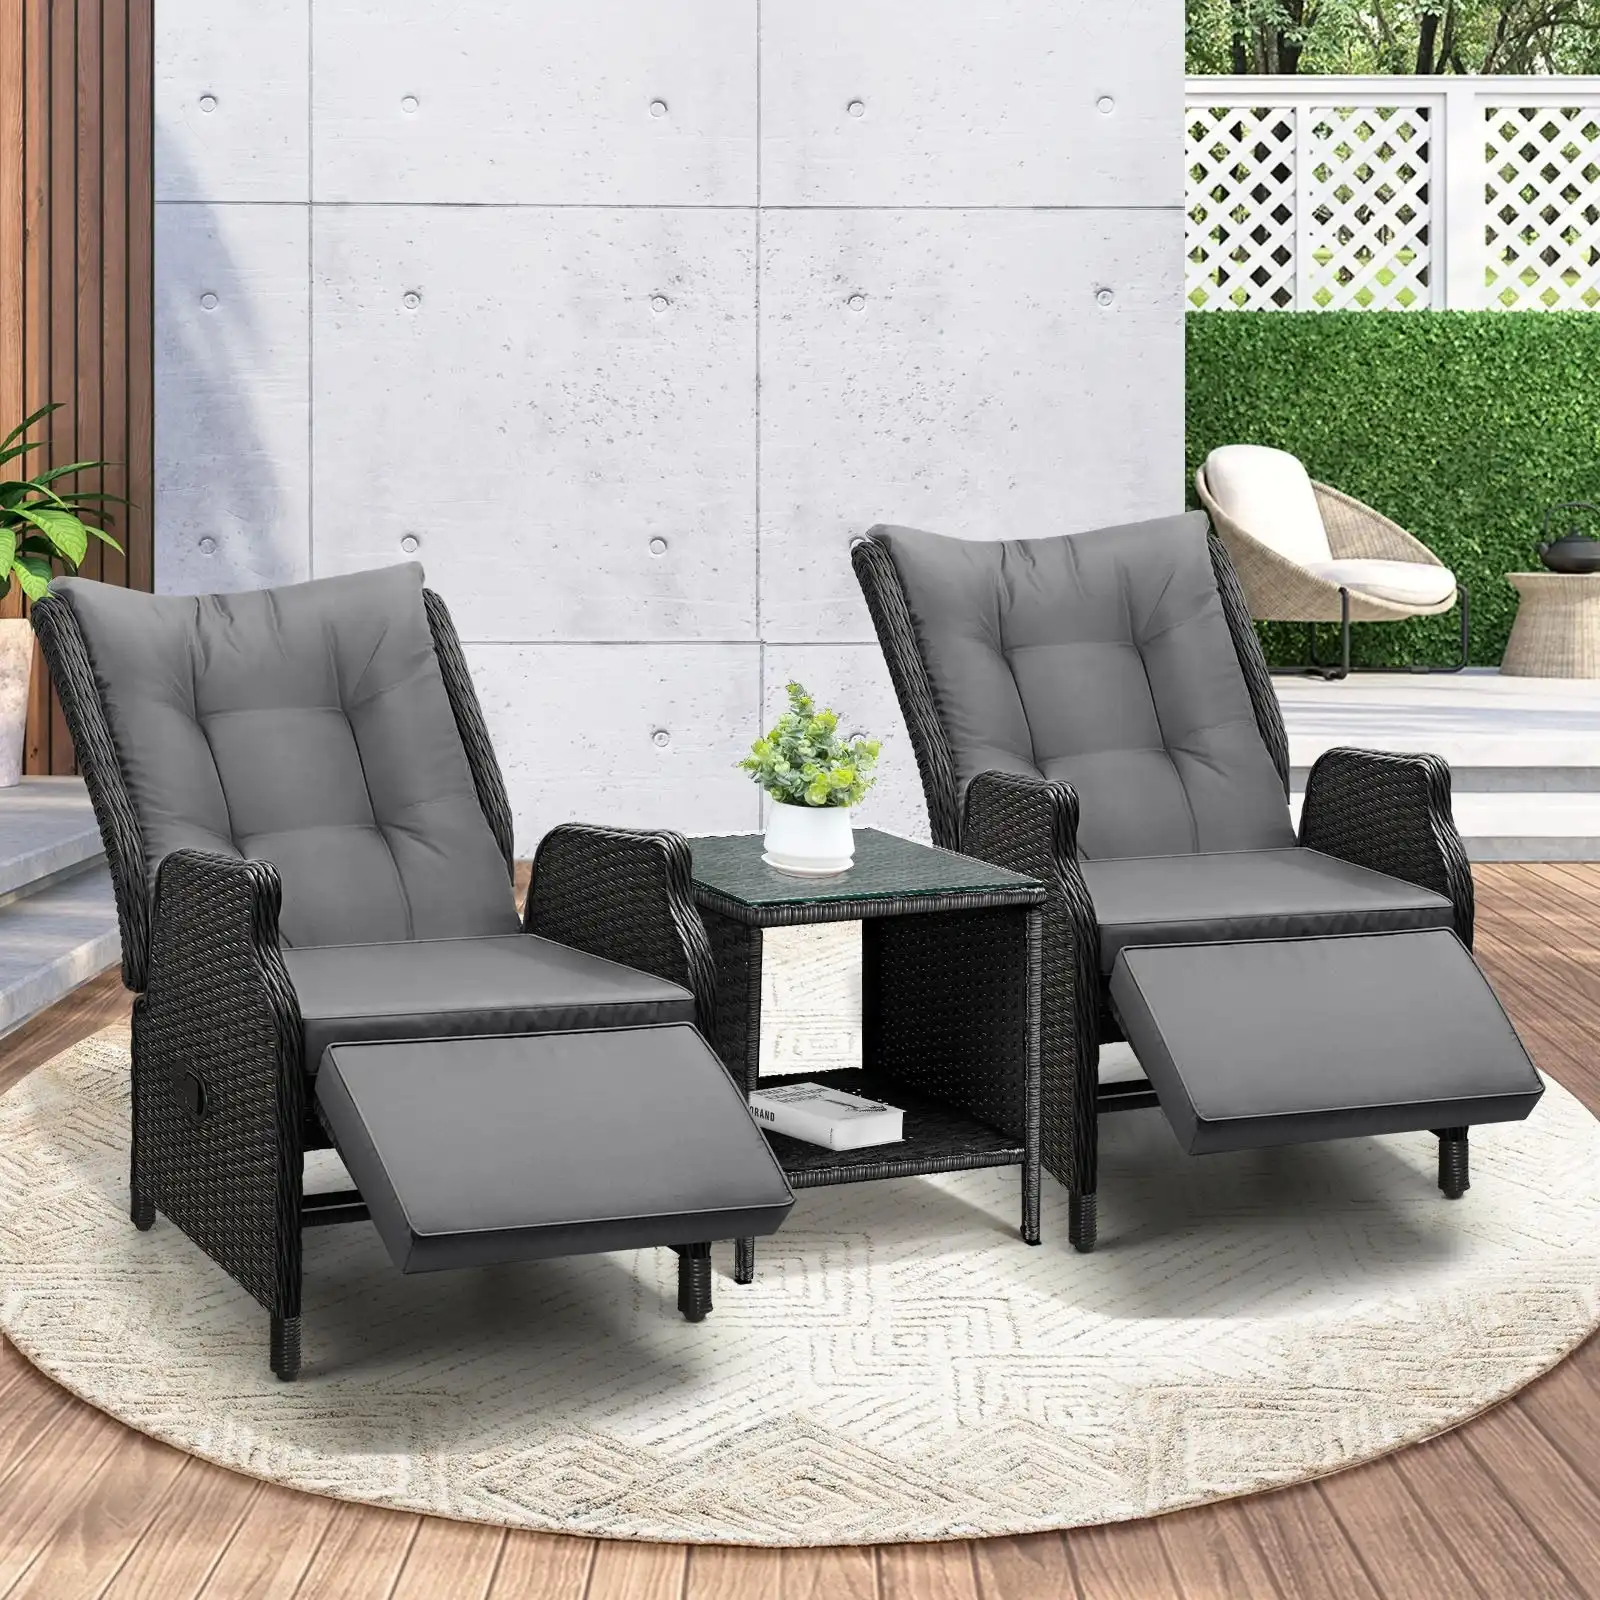 Livsip Sun Lounge Outdoor Recliner Chair &Table Outdoor Furniture Patio Set of 3